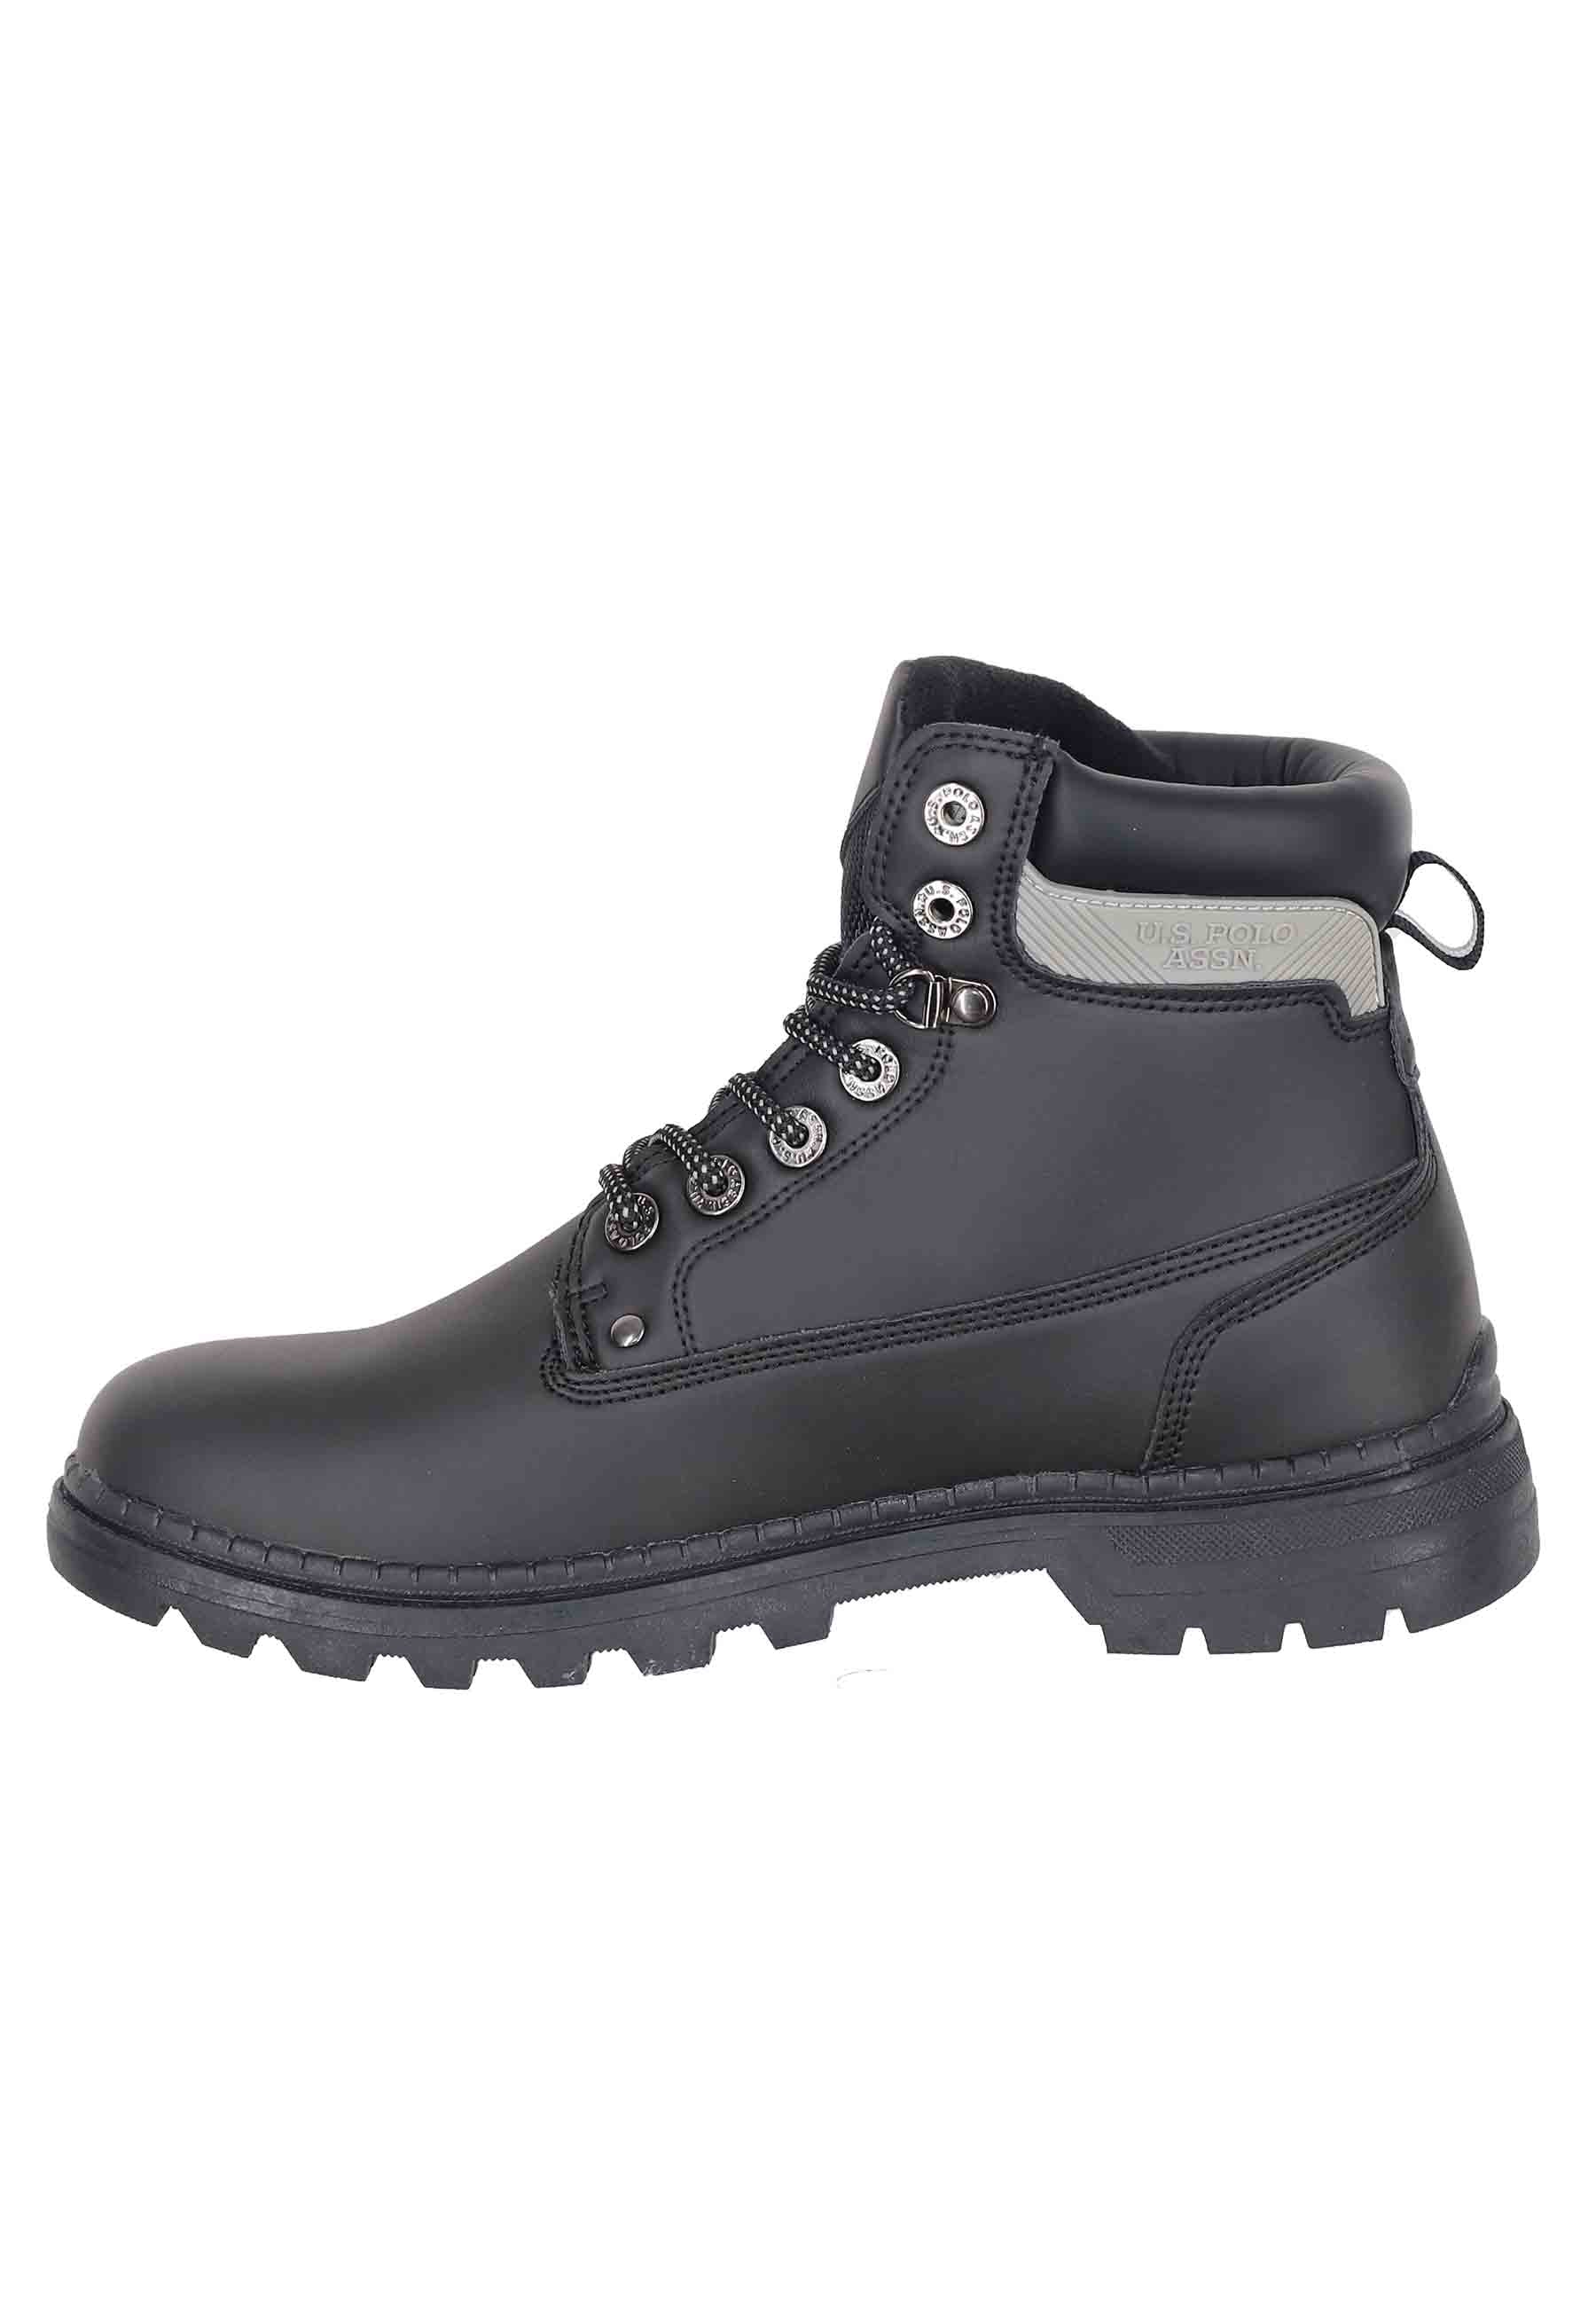 Men's amphibious ankle boots in black eco leather with lug sole